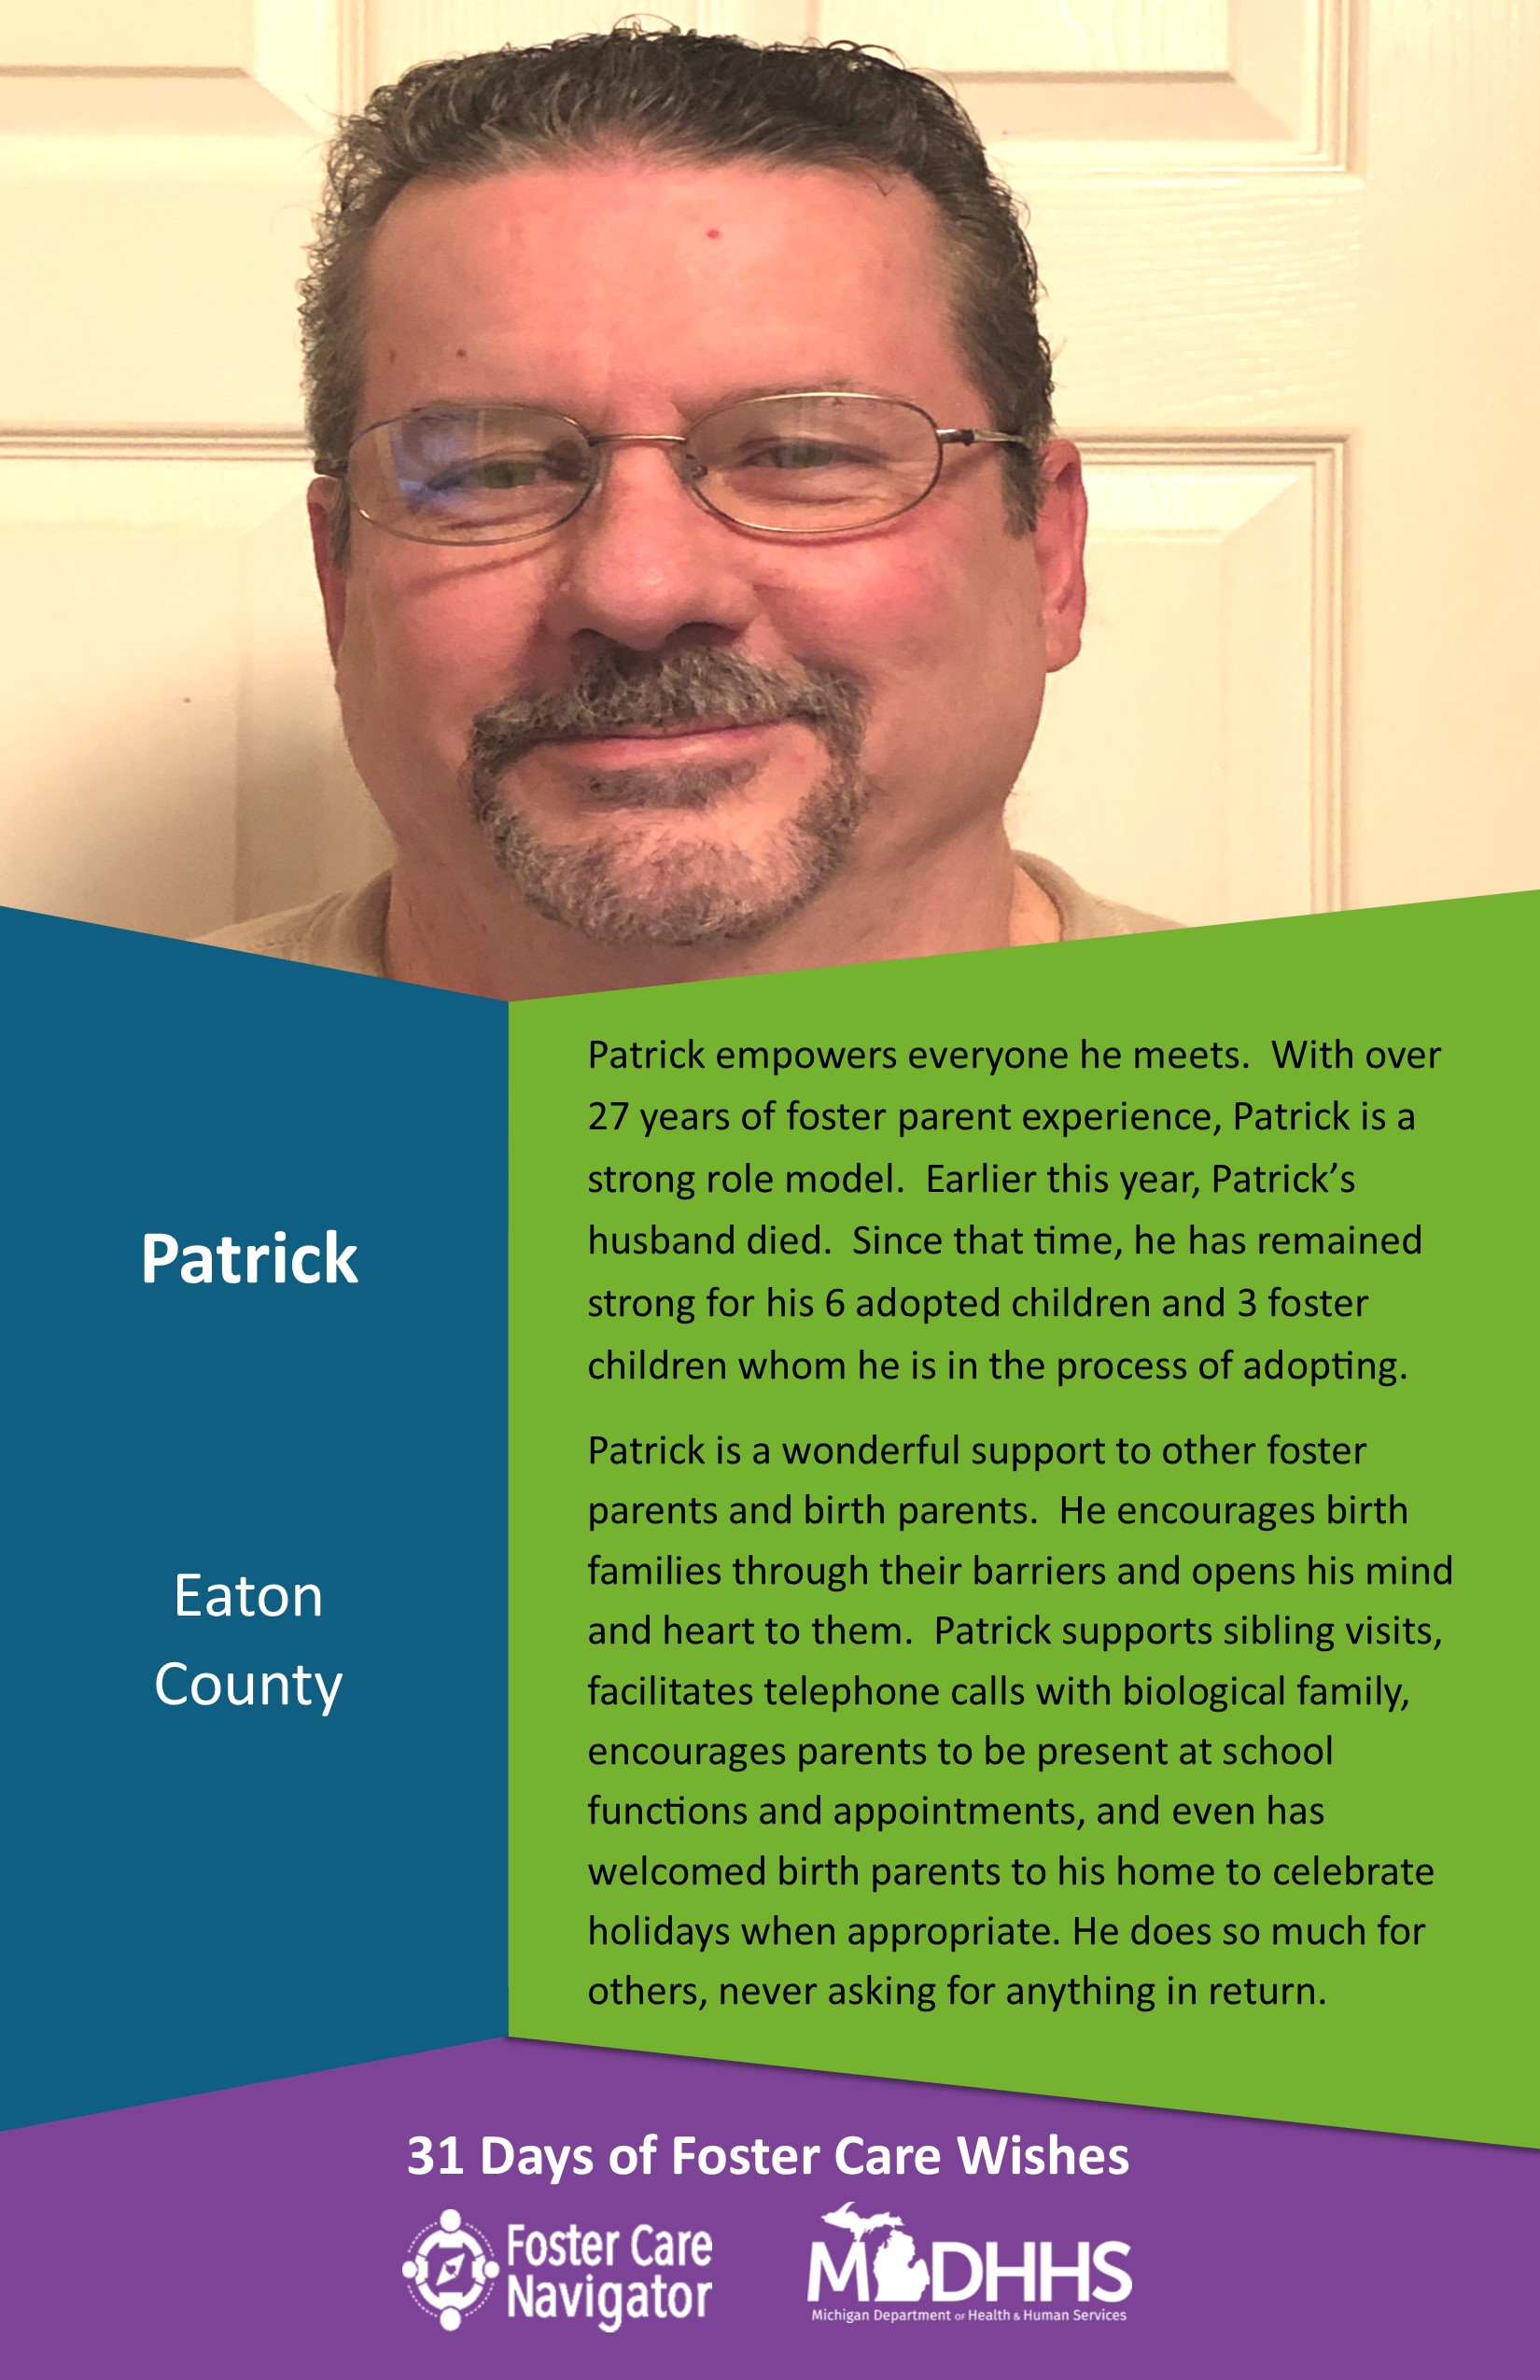 This full page feature includes all of the text listed in the body of this blog post as well as a photo of Patrick. The background is blue on the left, green on the right, and purple at the bottom of the page where the logos are located.